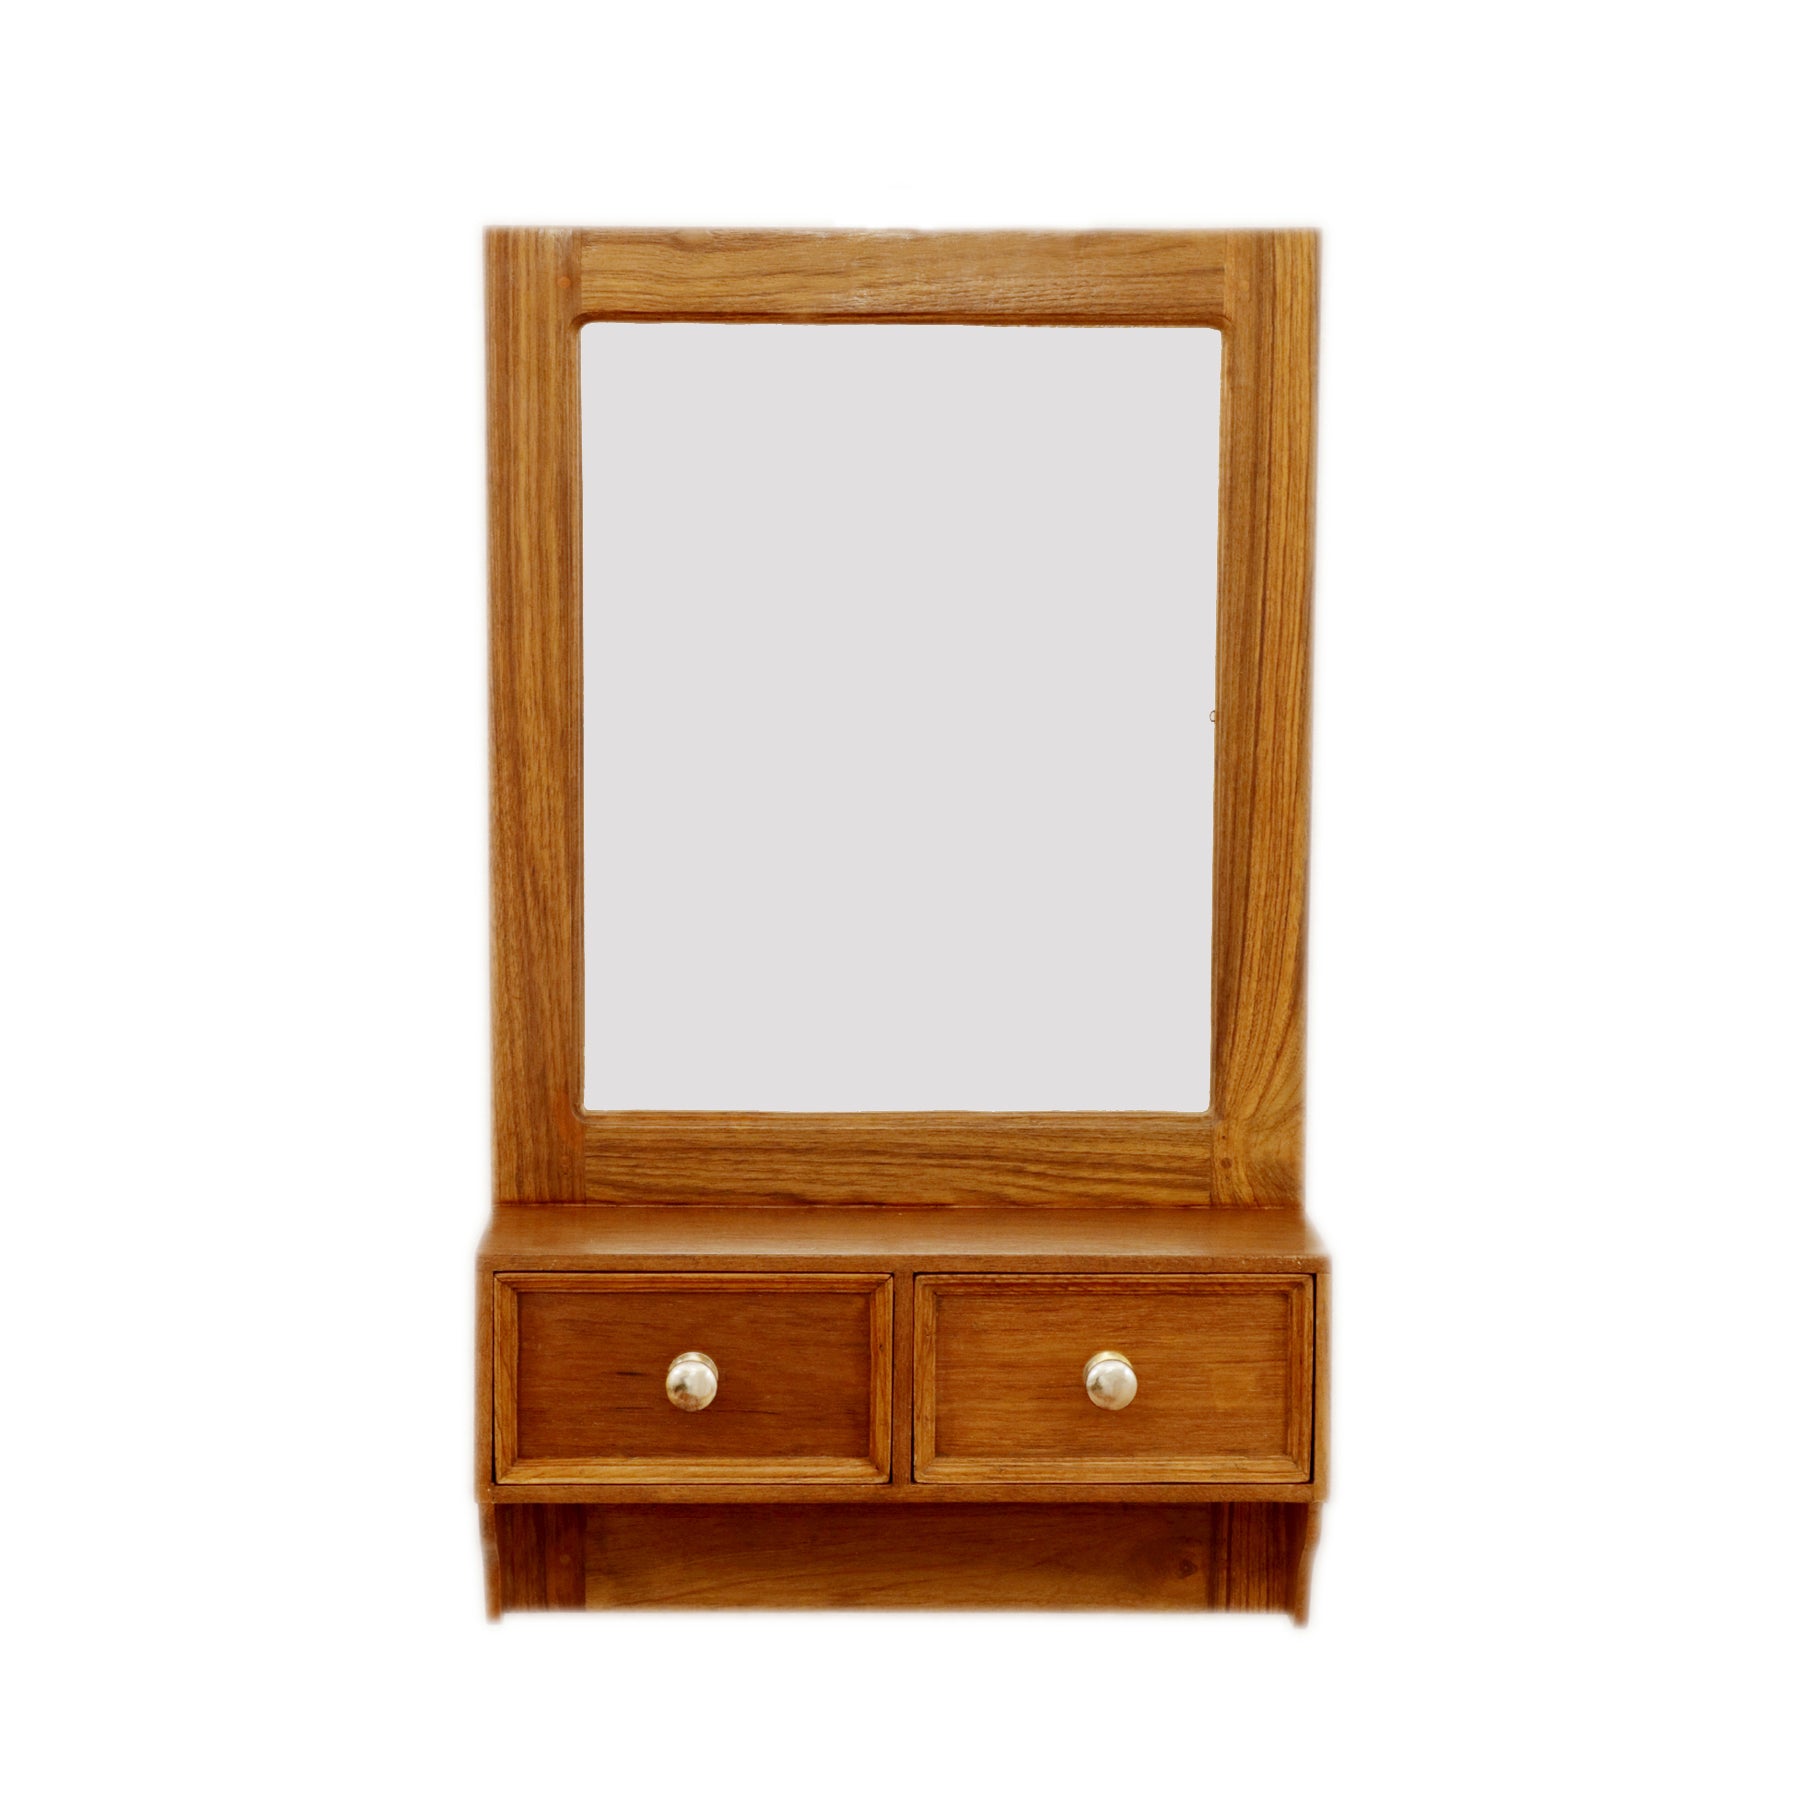 Uber Classy Two Drawers Mirror Mirror